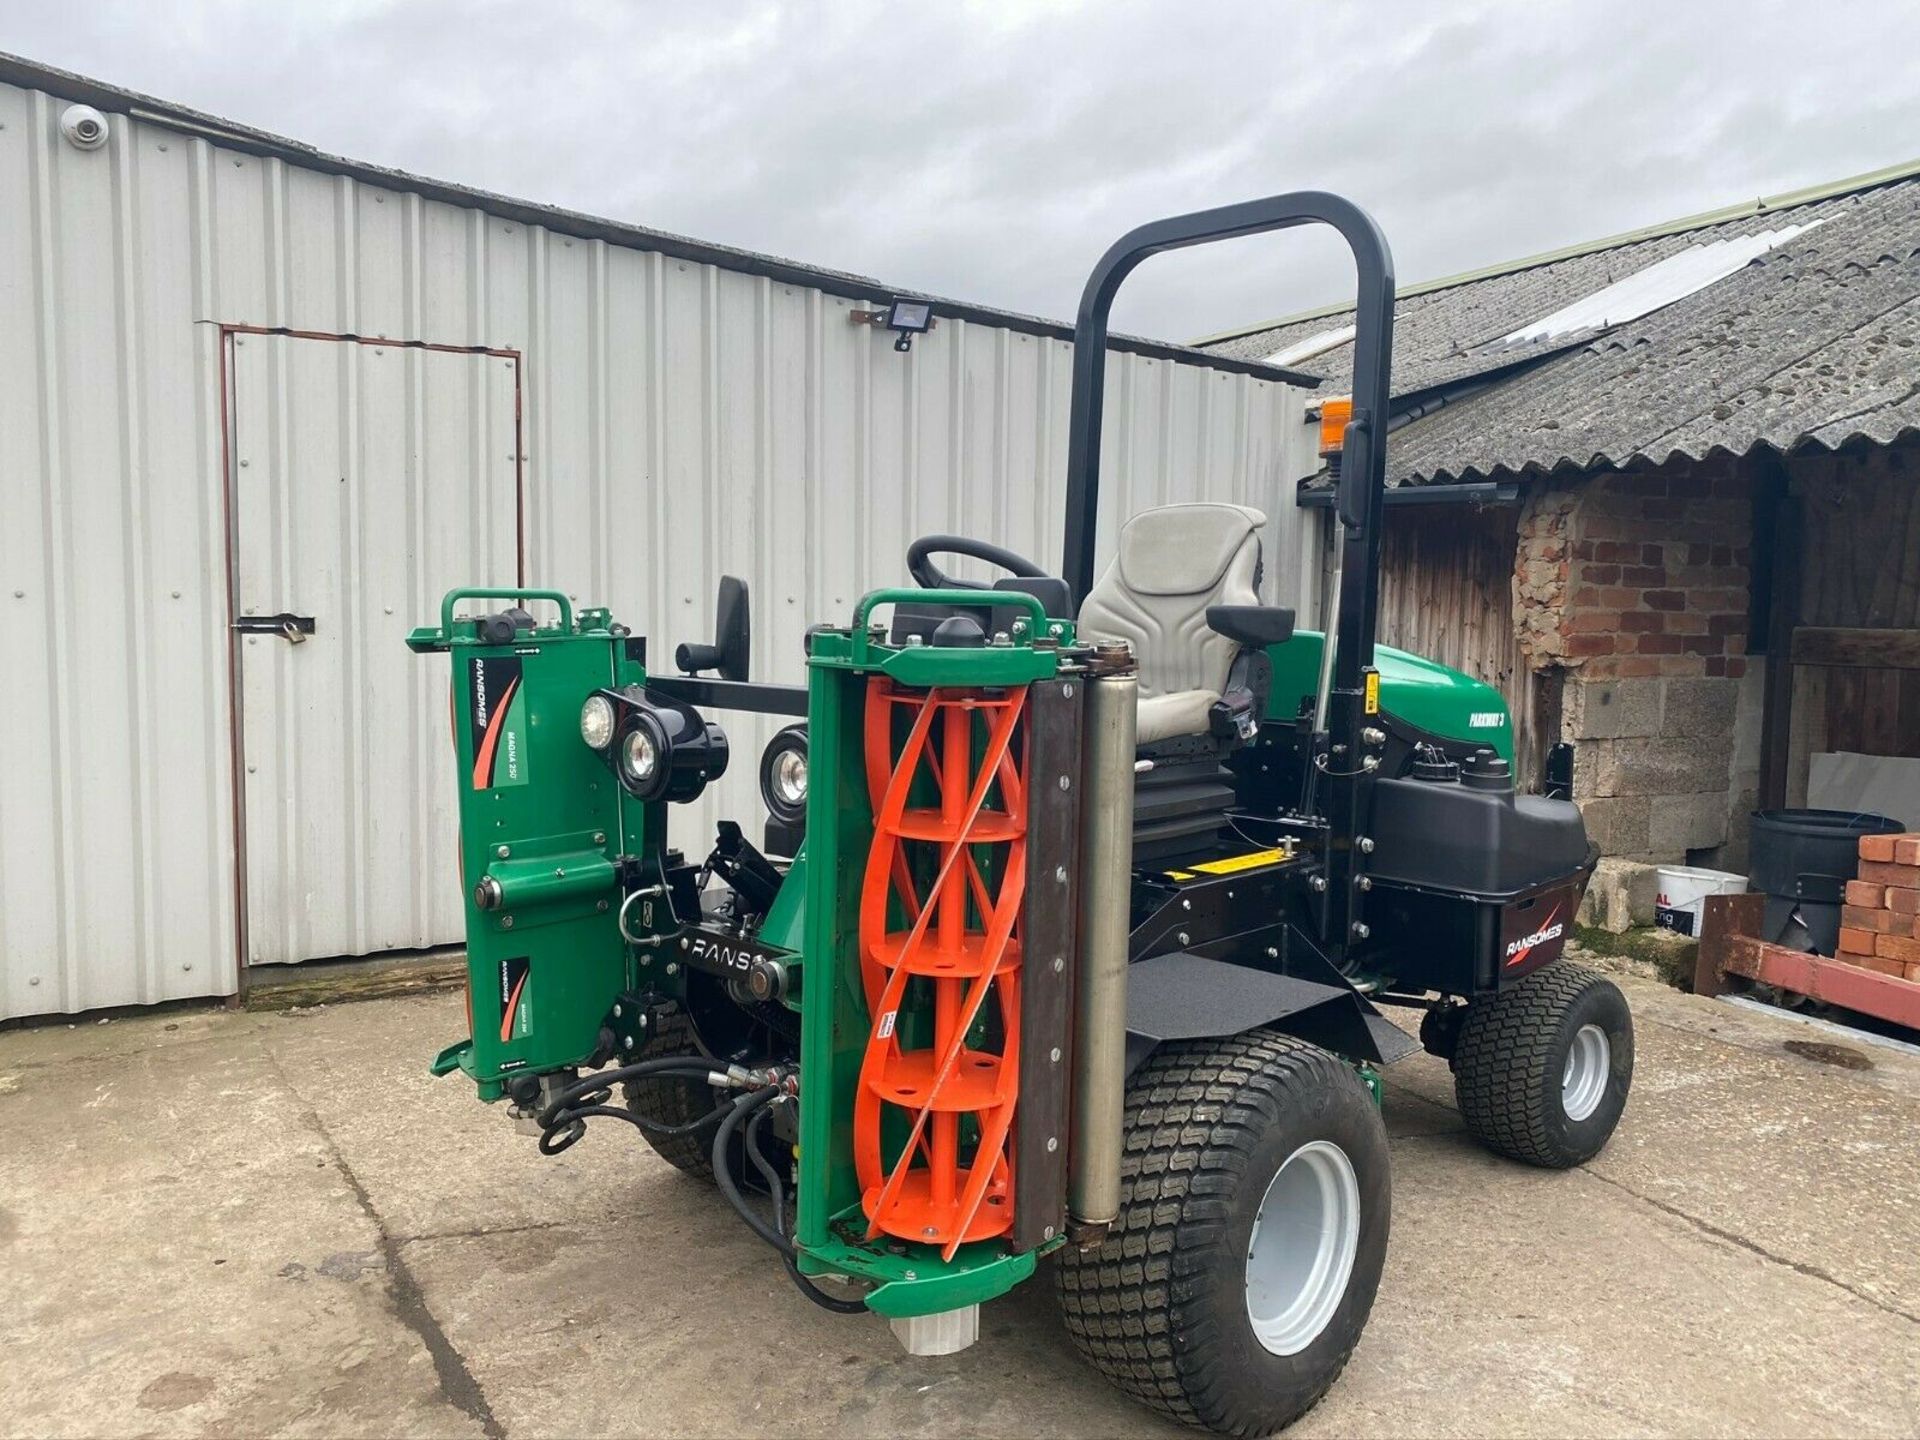 IMMACULATE! RANSOMES PARKWAY 3 TRIPLE CYLINDER MOWER, ONLY 953 HOURS, YEAR 2015, NEW CYLINDERS ETC